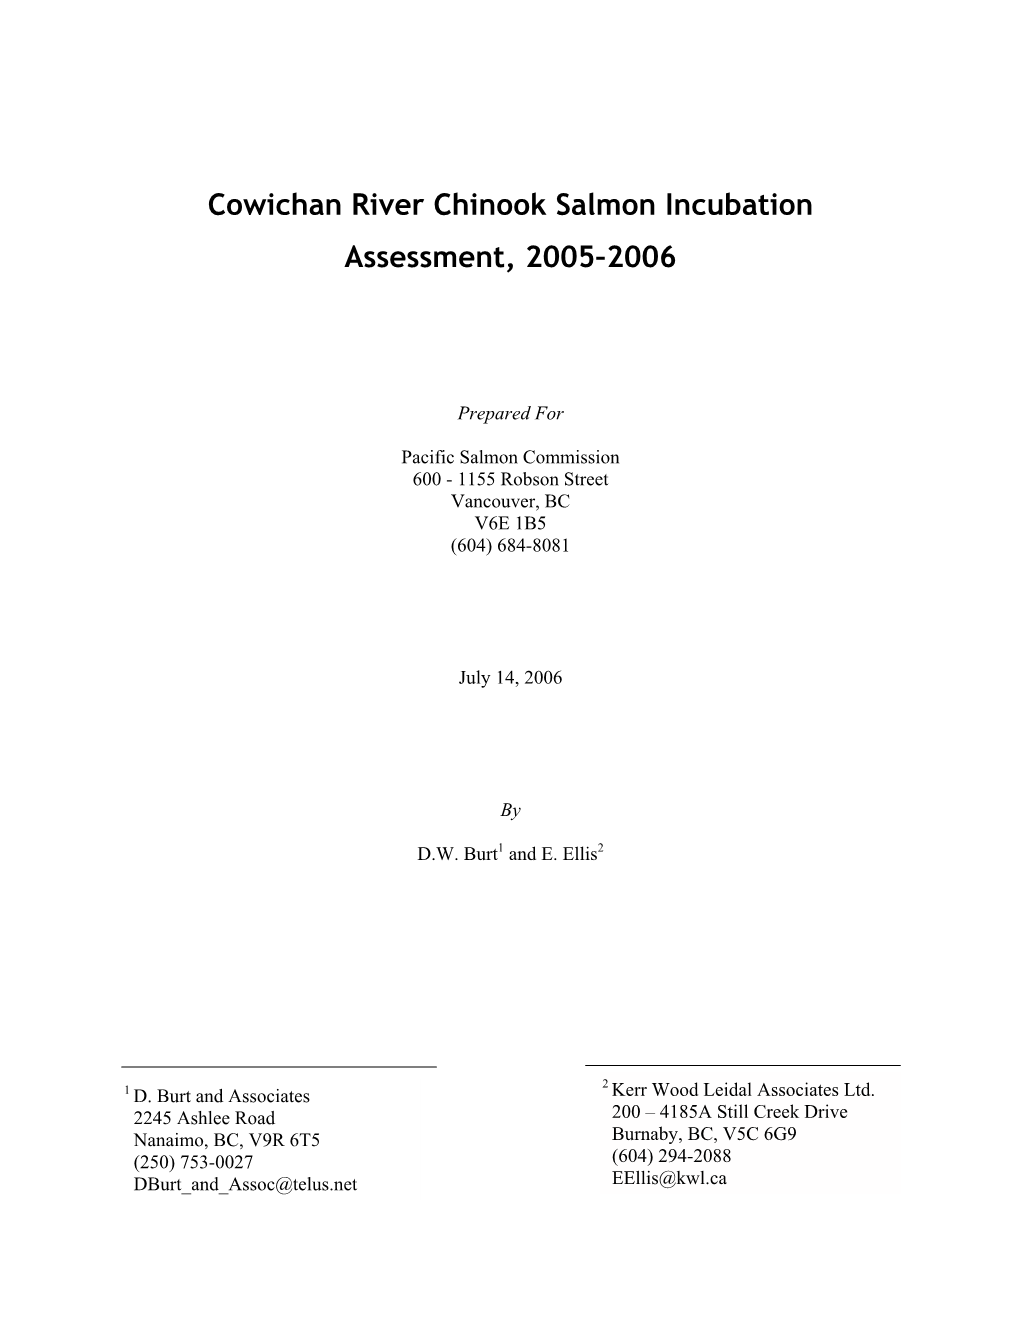 Cowichan River Chinook Salmon Incubation Assessment, 2005-2006